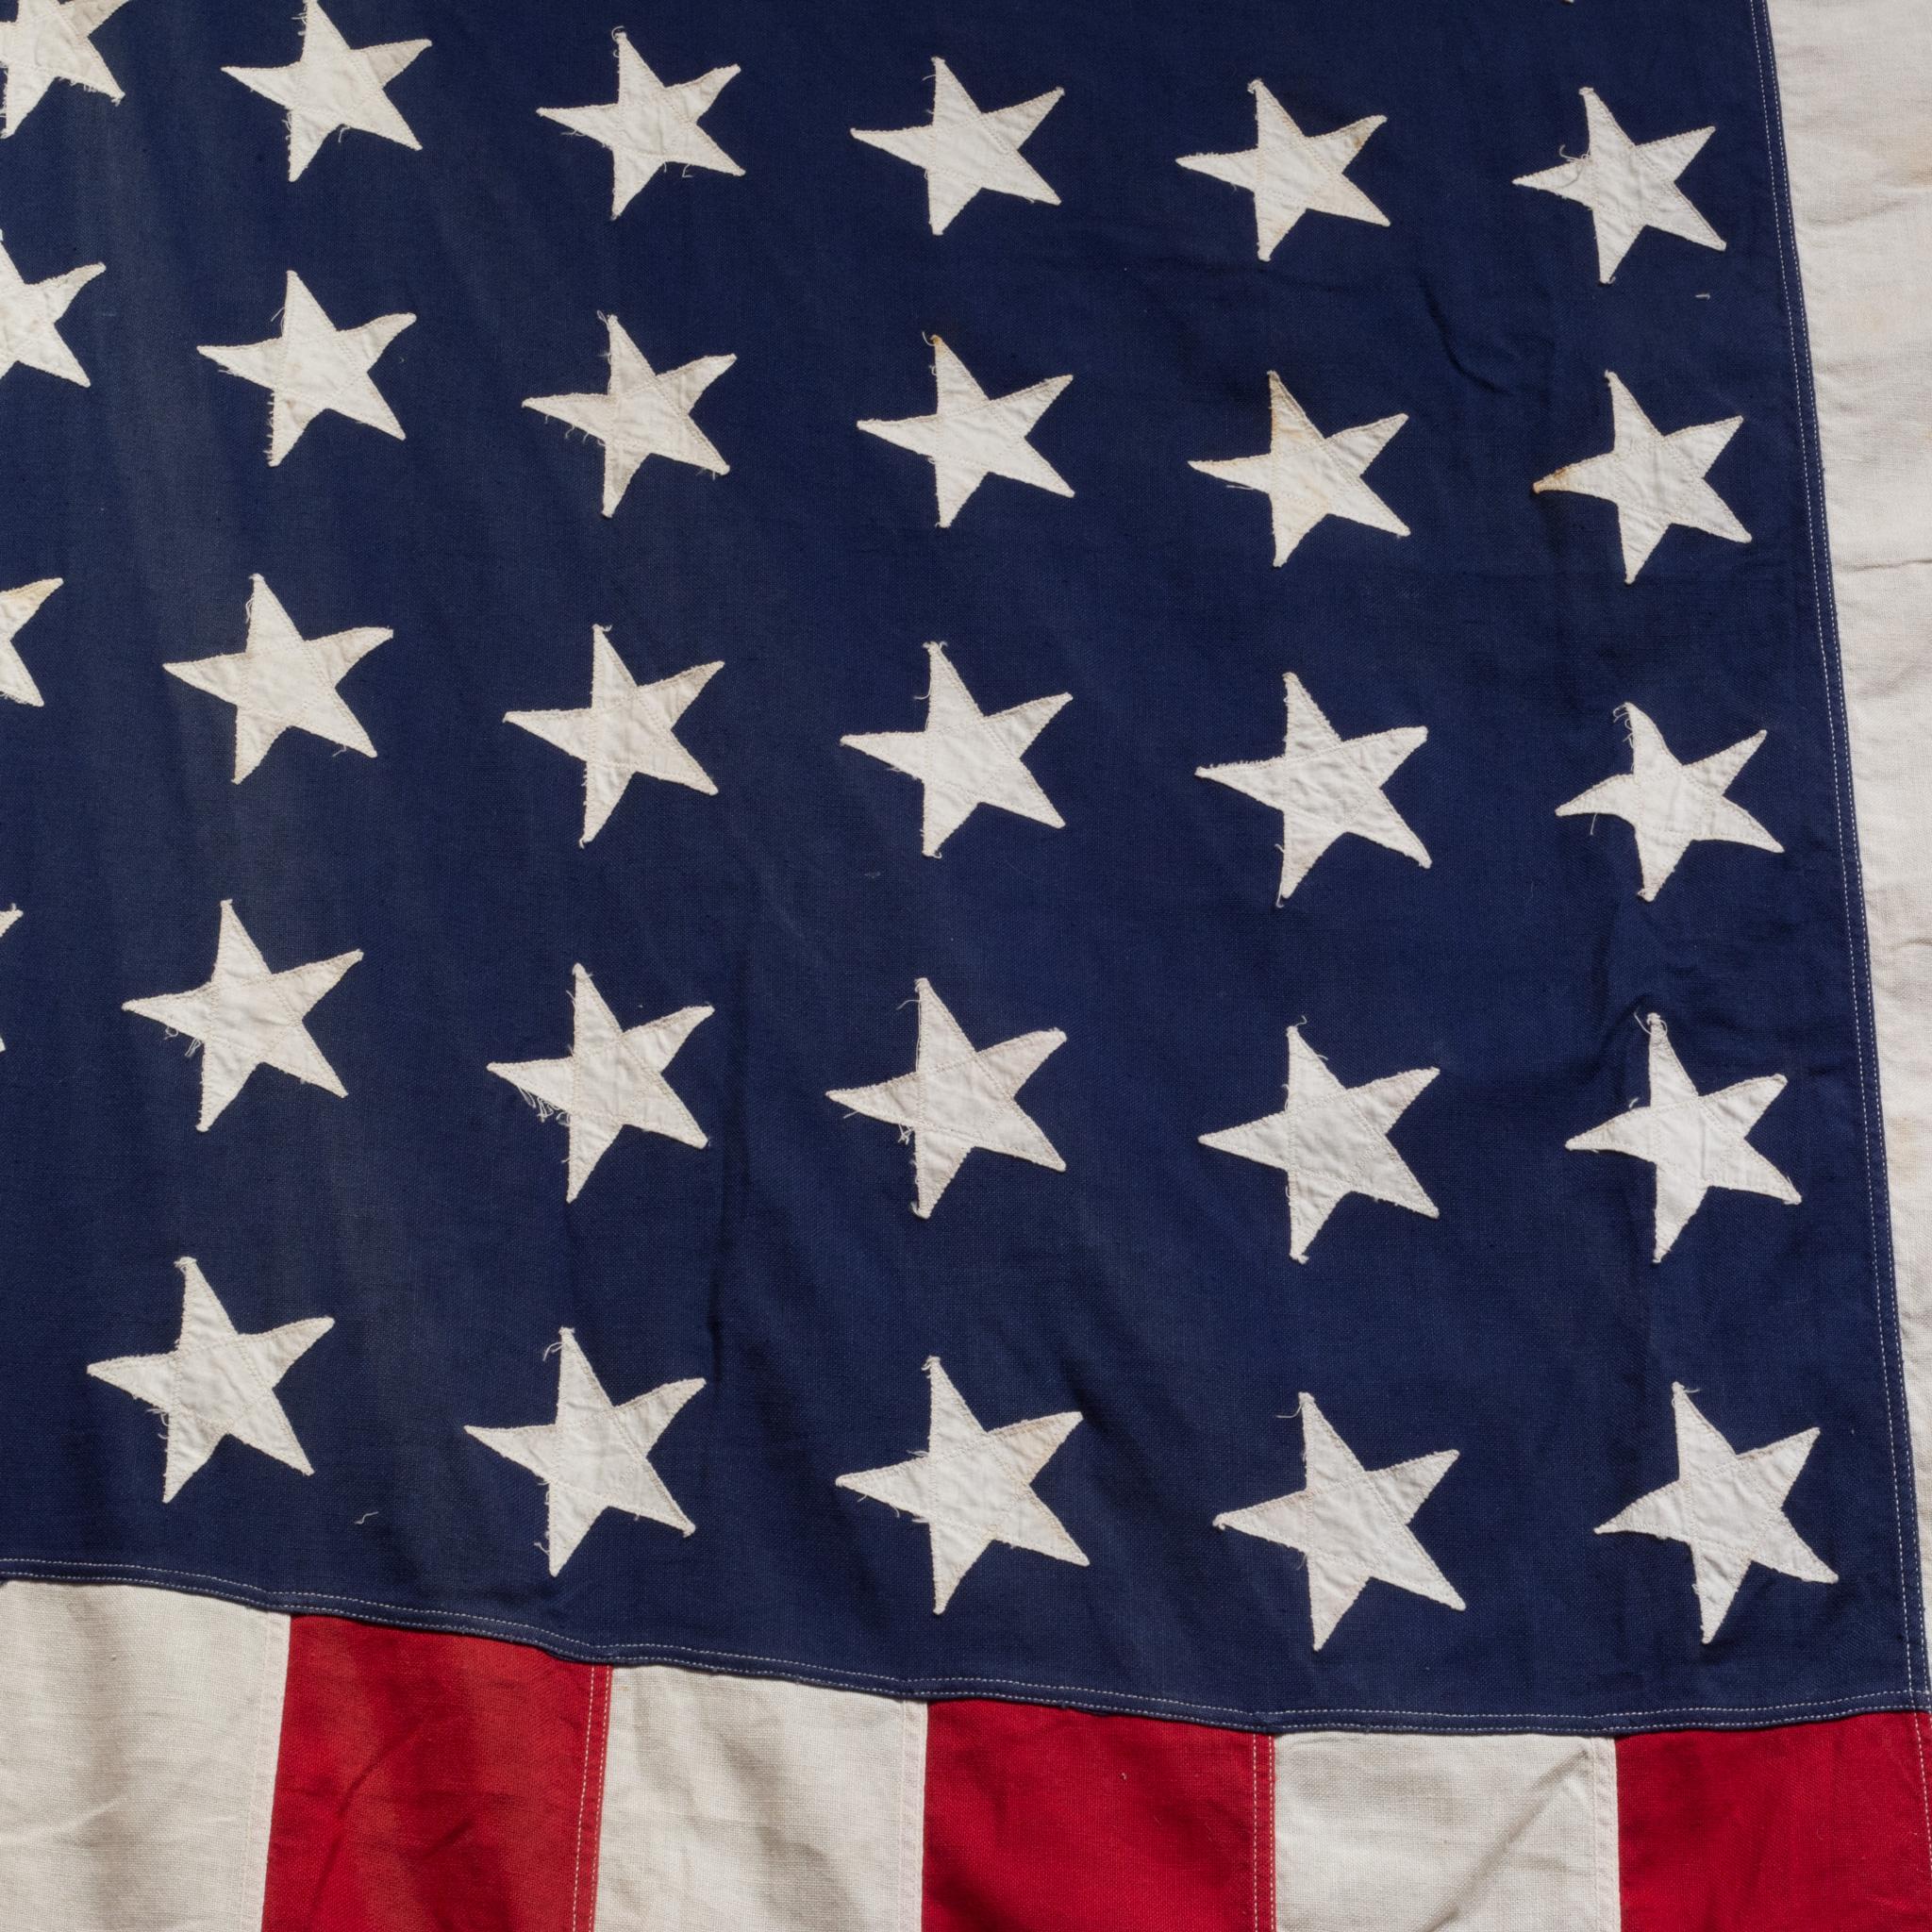 Industrial Early 20th C. Monumental American Flag with 48 Stars, c.1940-1950 For Sale